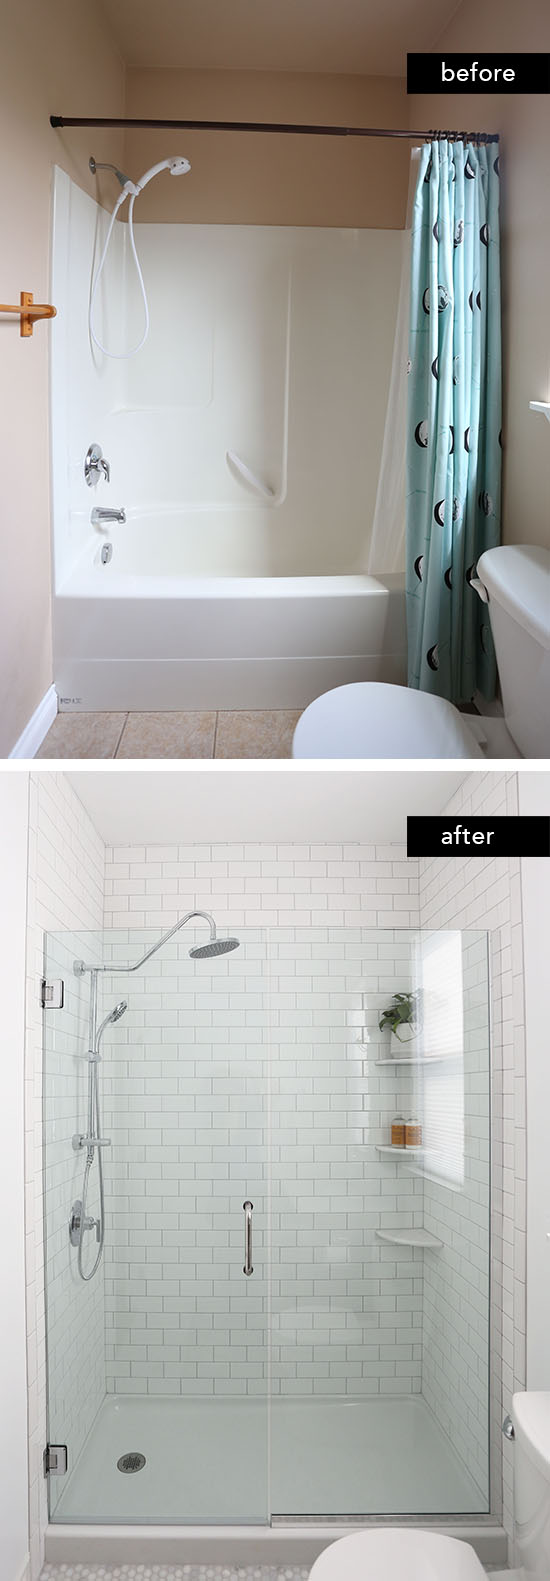 Before & after: tub surround to tiled shower